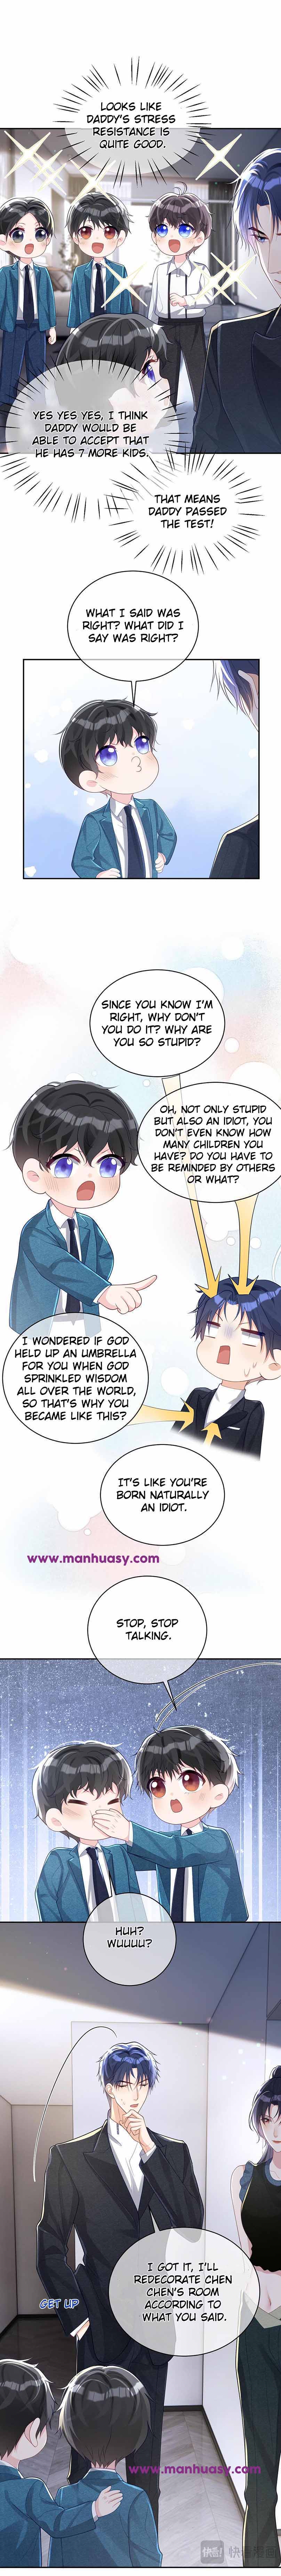 Cute Baby From Heaven: Daddy is Too Strong chapter 42